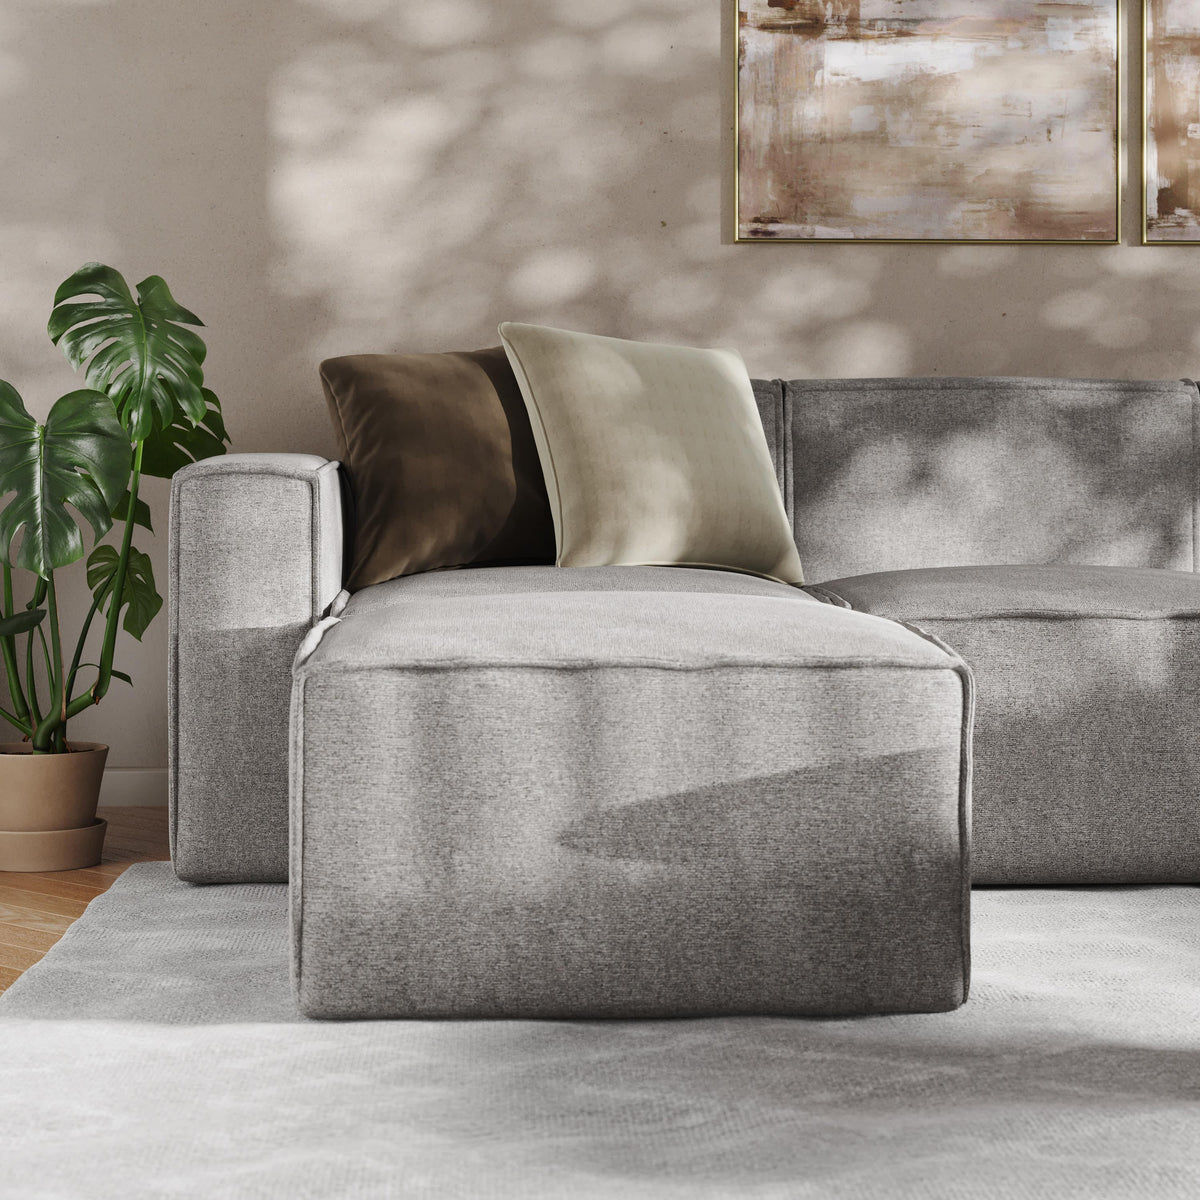 Gray |#| Contemporary 6 Piece Modular Sectional Sofa with 2 Ottomans in Gray Fabric